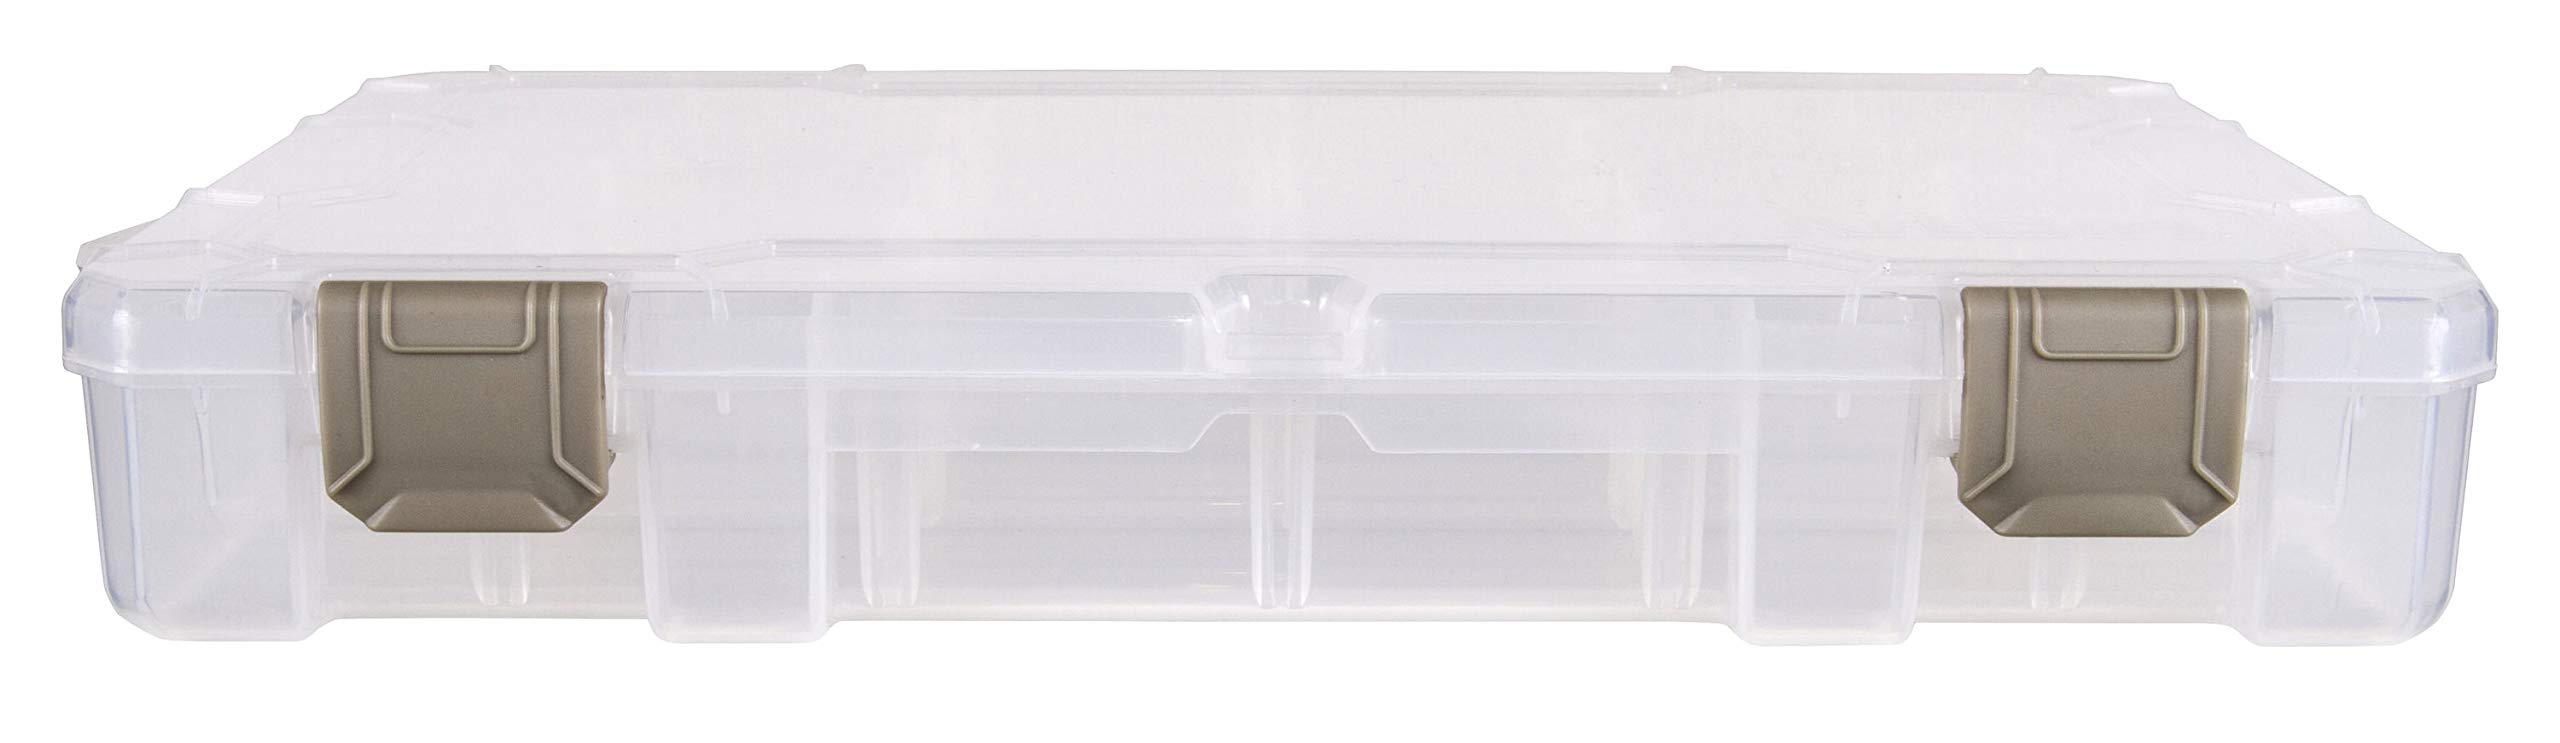 ArtBin 6840JN Floss Finder Box, Sewing & Embroidery Organizer, [1] Plastic Storage Case, Clear